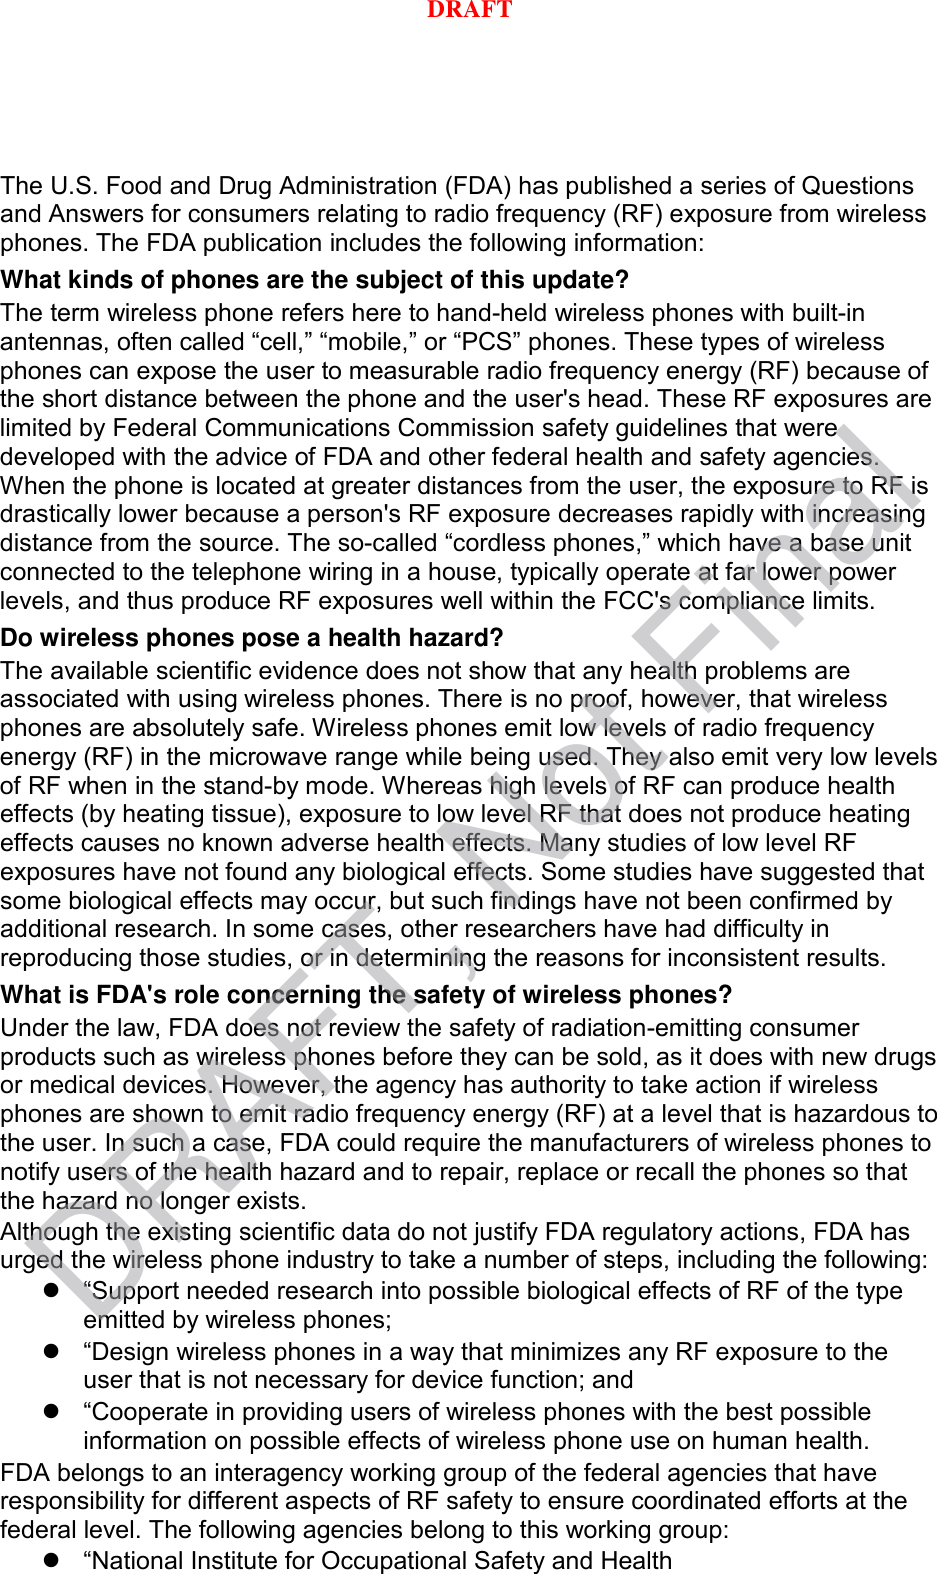 The U.S. Food and Drug Administration (FDA) has published a series of Questions and Answers for consumers relating to radio frequency (RF) exposure from wireless phones. The FDA publication includes the following information: What kinds of phones are the subject of this update? The term wireless phone refers here to hand-held wireless phones with built-in antennas, often called “cell,” “mobile,” or “PCS” phones. These types of wireless phones can expose the user to measurable radio frequency energy (RF) because of the short distance between the phone and the user&apos;s head. These RF exposures are limited by Federal Communications Commission safety guidelines that were developed with the advice of FDA and other federal health and safety agencies. When the phone is located at greater distances from the user, the exposure to RF is drastically lower because a person&apos;s RF exposure decreases rapidly with increasing distance from the source. The so-called “cordless phones,” which have a base unit connected to the telephone wiring in a house, typically operate at far lower power levels, and thus produce RF exposures well within the FCC&apos;s compliance limits. Do wireless phones pose a health hazard? The available scientific evidence does not show that any health problems are associated with using wireless phones. There is no proof, however, that wireless phones are absolutely safe. Wireless phones emit low levels of radio frequency energy (RF) in the microwave range while being used. They also emit very low levels of RF when in the stand-by mode. Whereas high levels of RF can produce health effects (by heating tissue), exposure to low level RF that does not produce heating effects causes no known adverse health effects. Many studies of low level RF exposures have not found any biological effects. Some studies have suggested that some biological effects may occur, but such findings have not been confirmed by additional research. In some cases, other researchers have had difficulty in reproducing those studies, or in determining the reasons for inconsistent results. What is FDA&apos;s role concerning the safety of wireless phones? Under the law, FDA does not review the safety of radiation-emitting consumer products such as wireless phones before they can be sold, as it does with new drugs or medical devices. However, the agency has authority to take action if wireless phones are shown to emit radio frequency energy (RF) at a level that is hazardous to the user. In such a case, FDA could require the manufacturers of wireless phones to notify users of the health hazard and to repair, replace or recall the phones so that the hazard no longer exists. Although the existing scientific data do not justify FDA regulatory actions, FDA has urged the wireless phone industry to take a number of steps, including the following: “Support needed research into possible biological effects of RF of the typeemitted by wireless phones;“Design wireless phones in a way that minimizes any RF exposure to theuser that is not necessary for device function; and“Cooperate in providing users of wireless phones with the best possibleinformation on possible effects of wireless phone use on human health.FDA belongs to an interagency working group of the federal agencies that have responsibility for different aspects of RF safety to ensure coordinated efforts at the federal level. The following agencies belong to this working group: “National Institute for Occupational Safety and HealthDRAFT, Not FinalDRAFT